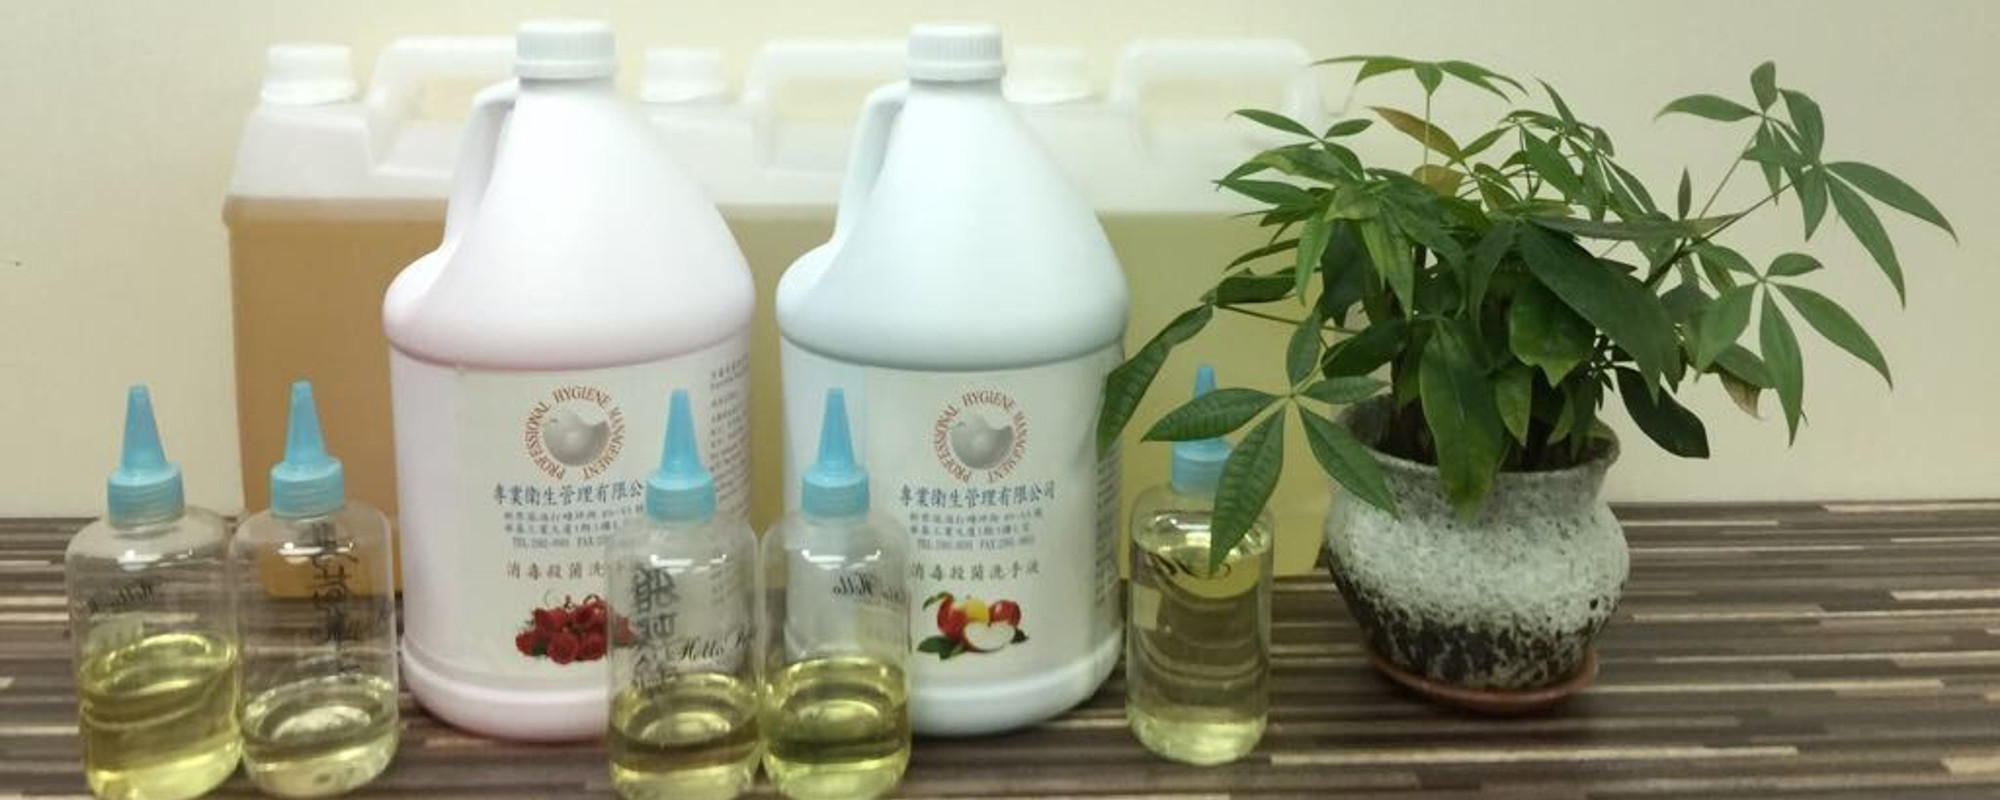 cleaning_products_essential_oil_and_perfume